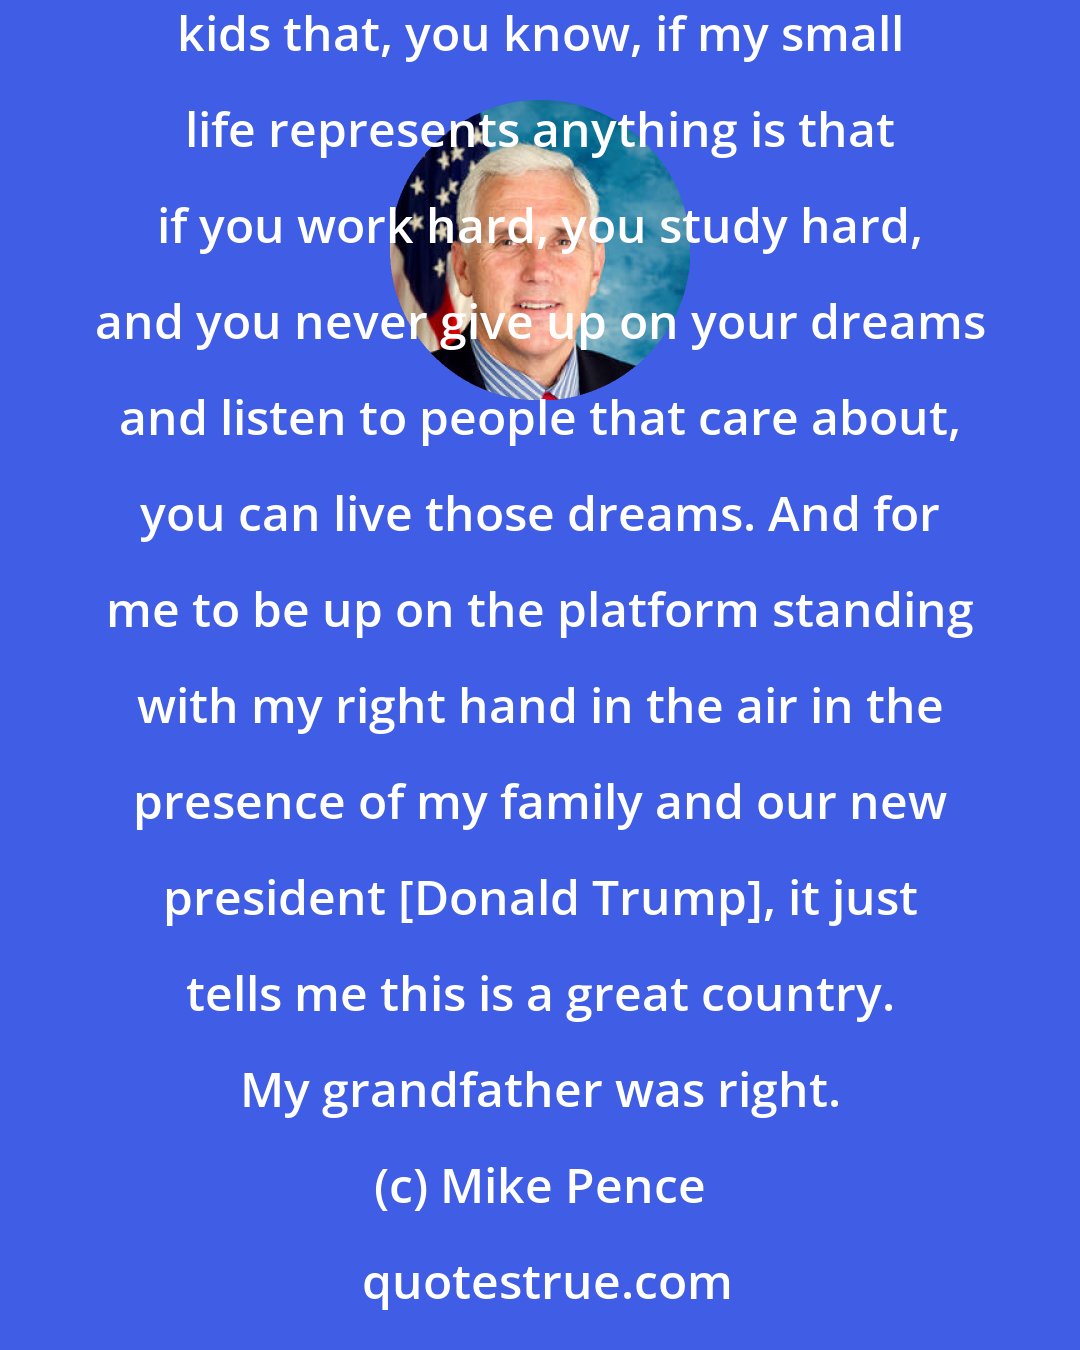 Mike Pence: This grandson of an Irish immigrant, after whom I was named, Richard Michael Cawley is my grandfather. I was right that - and I always tell kids that, you know, if my small life represents anything is that if you work hard, you study hard, and you never give up on your dreams and listen to people that care about, you can live those dreams. And for me to be up on the platform standing with my right hand in the air in the presence of my family and our new president [Donald Trump], it just tells me this is a great country. My grandfather was right.